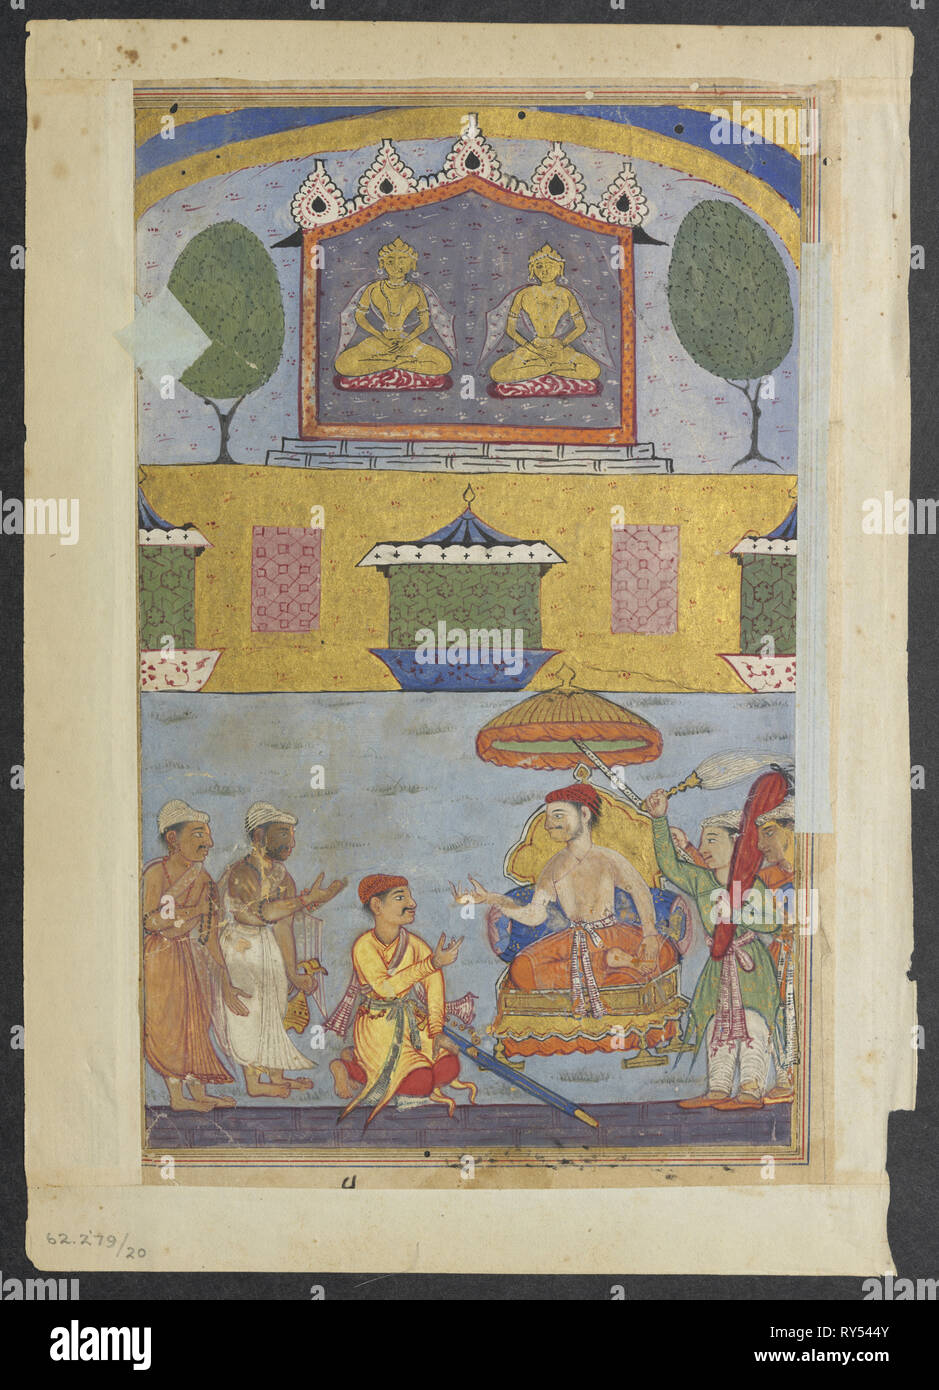 Page from Tales of a Parrot (Tuti-nama): Third night: The goldsmith and the carpenter inform the king of a dream in which the golden images plan to desert the city for lack of worshippers, c. 1560. India, Mughal, Reign of Akbar, 16th century. Opaque watercolor and gold on paper Stock Photo